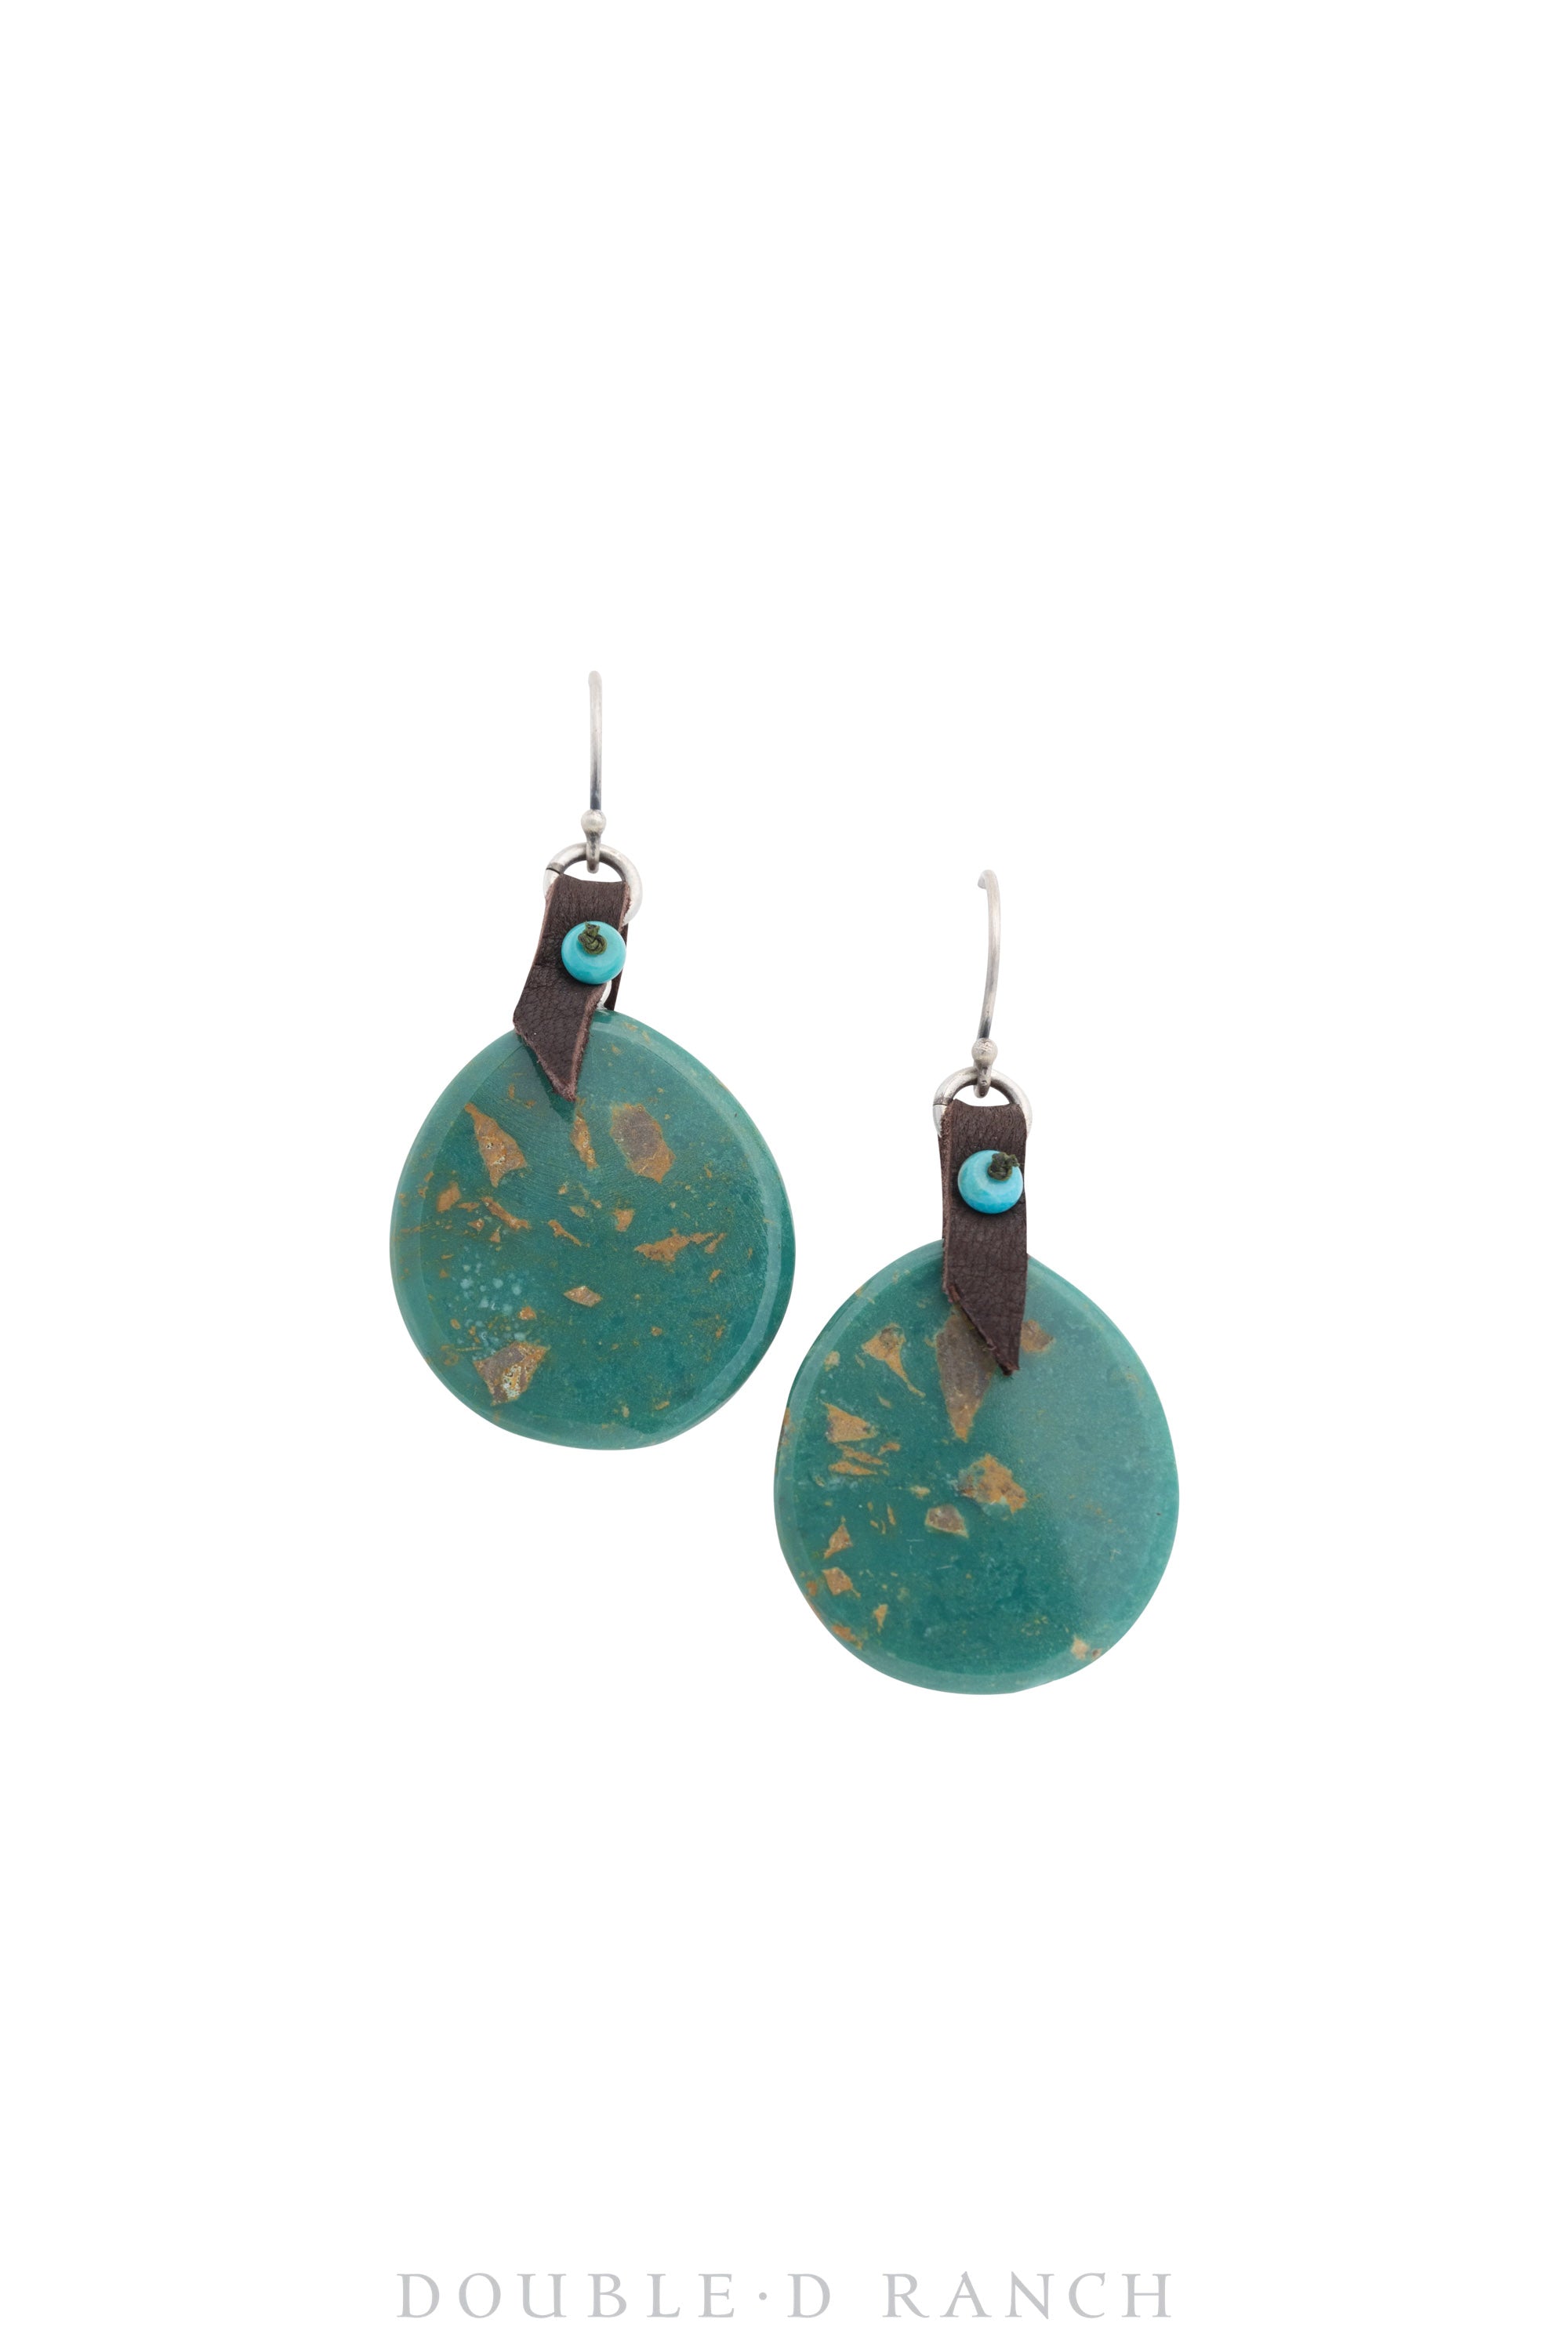 Earrings, Slab, Turquoise, Contemporary, 1481